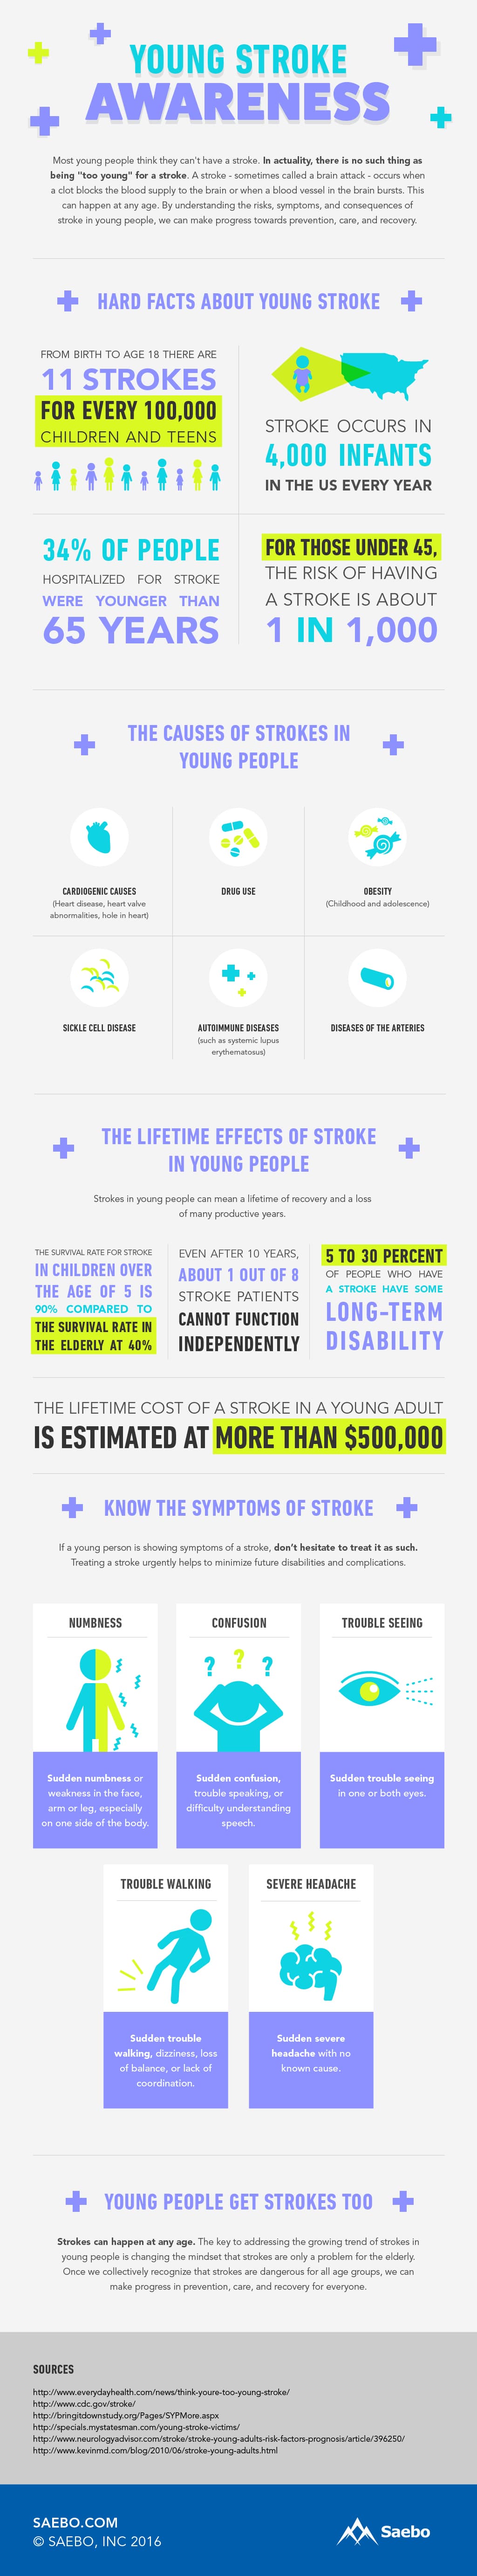 Infographic - Young Stroke Awareness